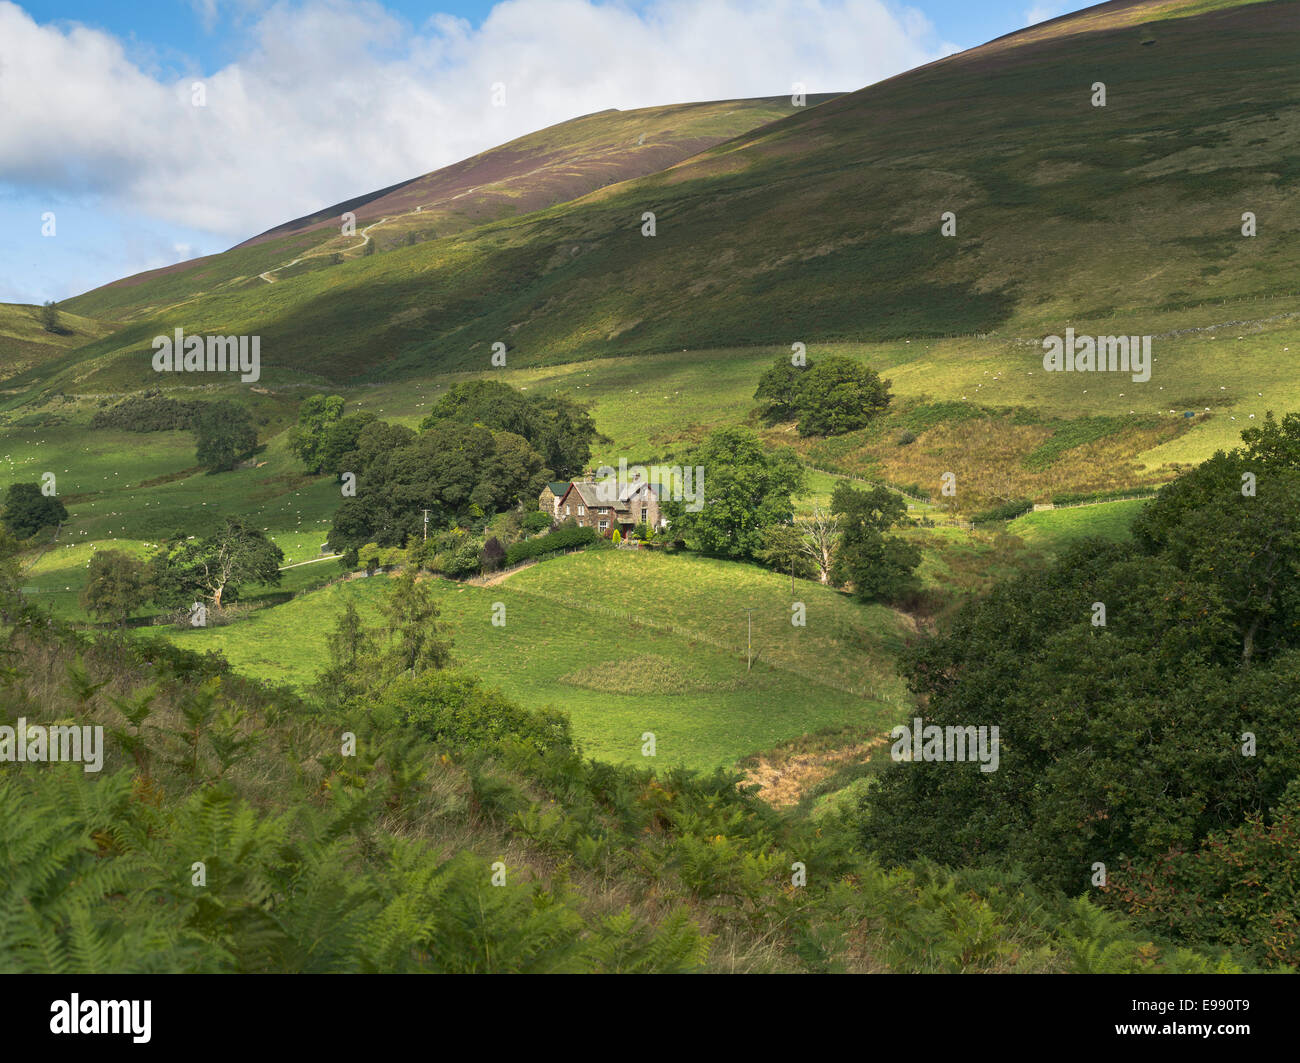 dh Lonscale Fell Cumbria England KESWICK LAKE DISTRICT Country house hill in Cumbrian countryside rural english scene hills UK Stock Photo